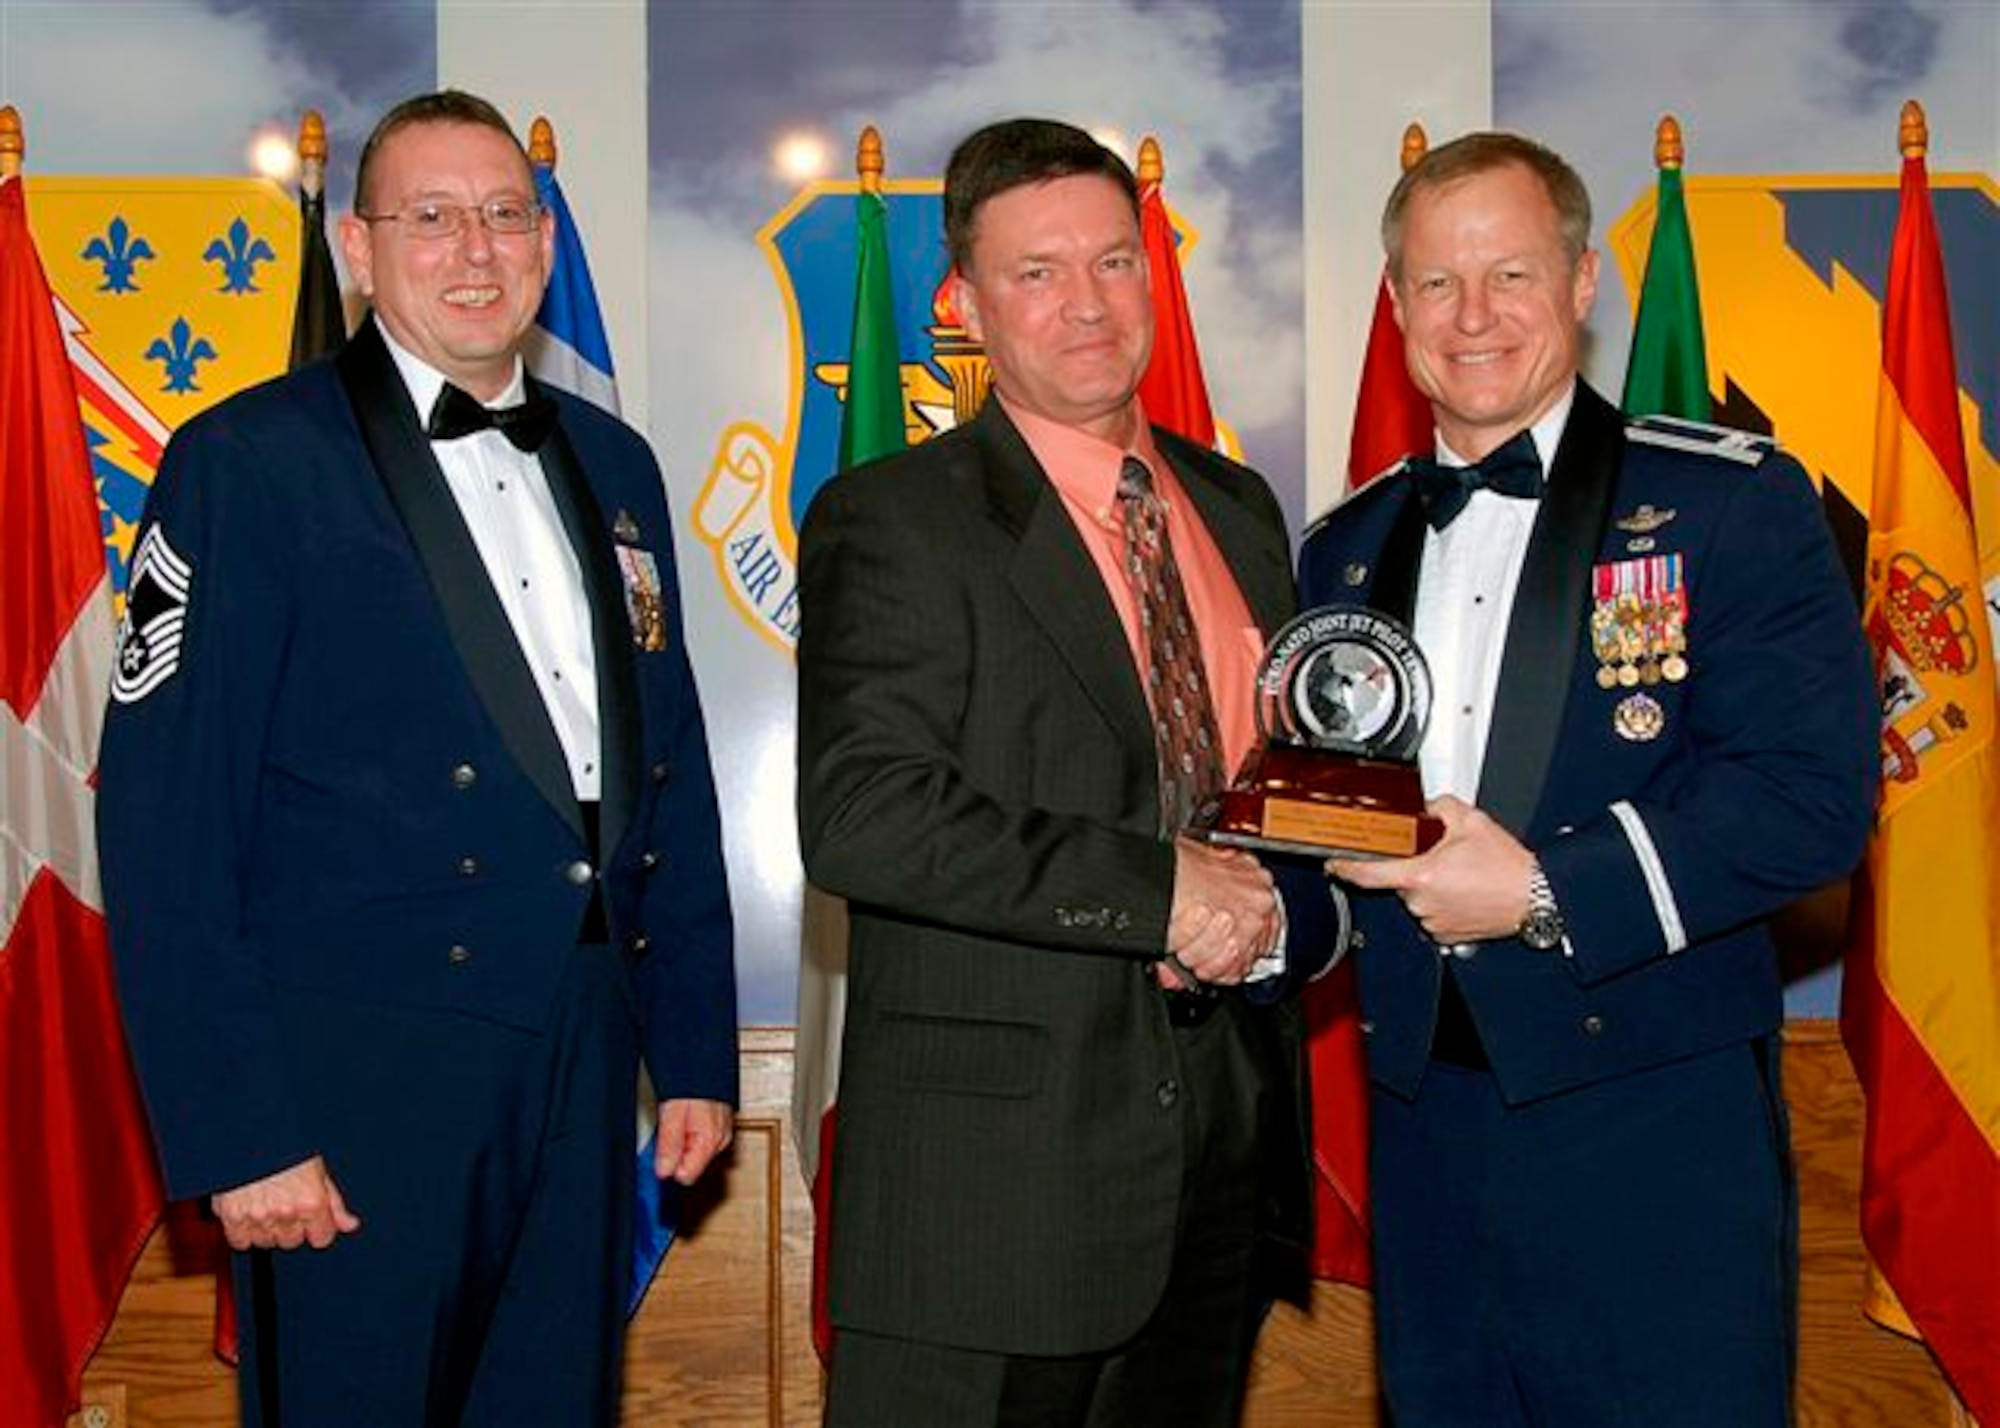 David Hudspecth, center, accepts the award as the 80th Flying Training Wing's 2008 Senior Civilian of the Year, catagory III. The 80th Operations Support Squadron air traffic controller has devoted more than 200 hours of training for more than 40 controllers enhancing their ability to control aircraft in situations where radar is unavailable.Also pictured is Col. David Petersen, 80th FTW commander, and Chief Master Sgt. Norman Thierolf, the wing's command chief. (U.S. Air Force photo) 